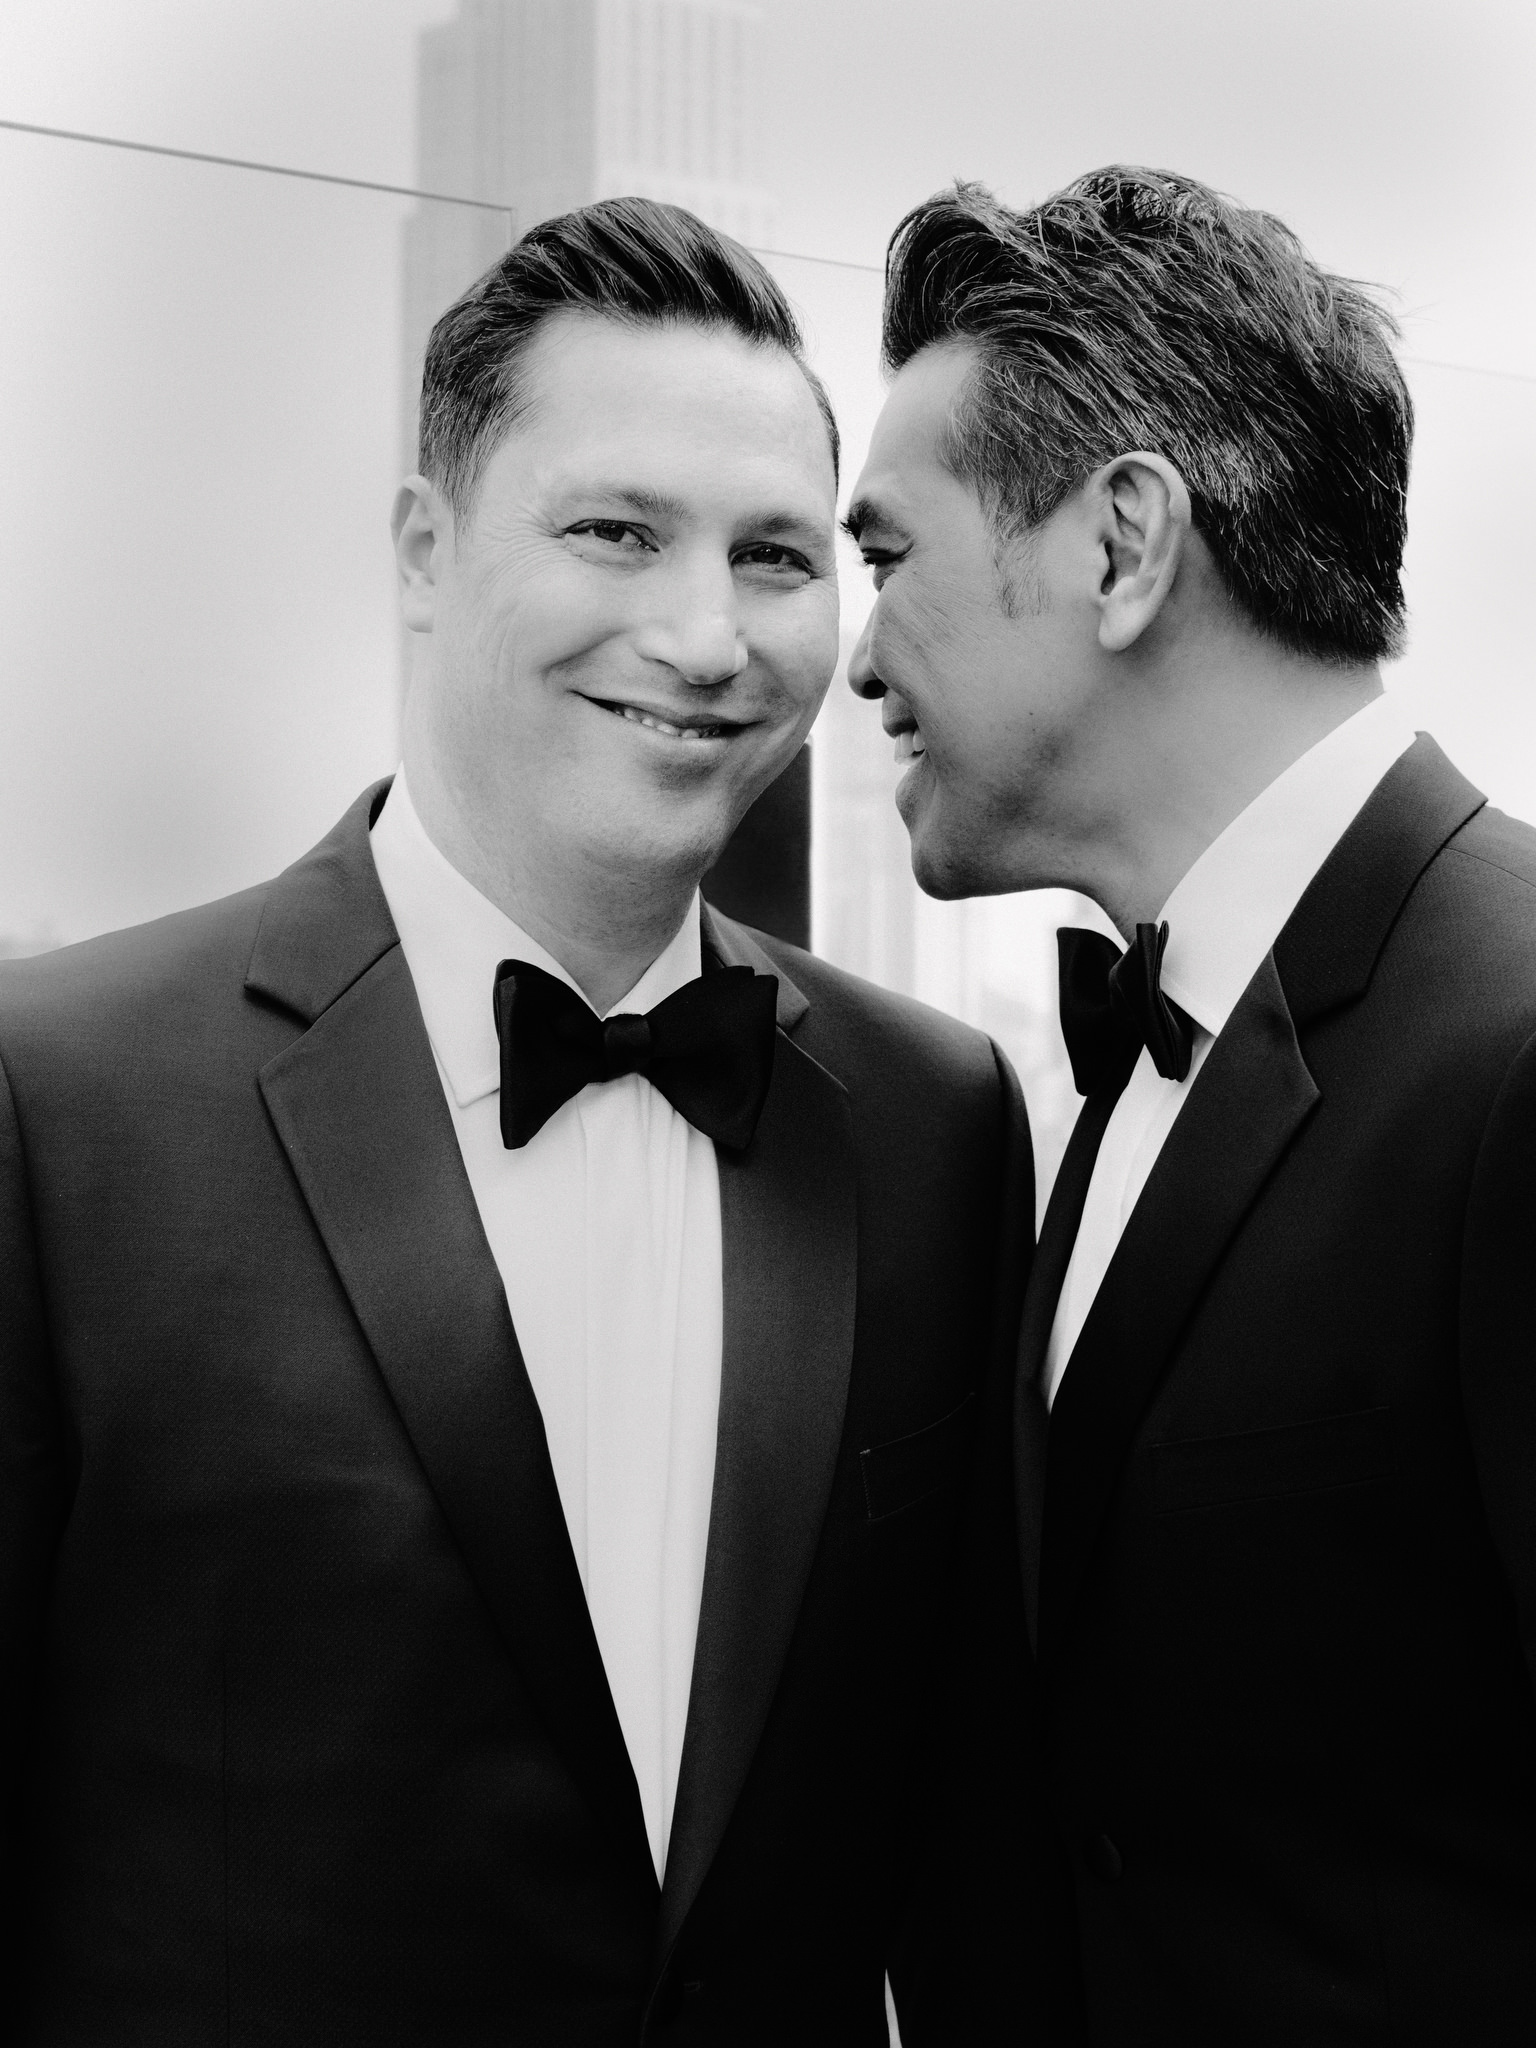 Same sex male couple smiling at each other wearing suits on wedding day